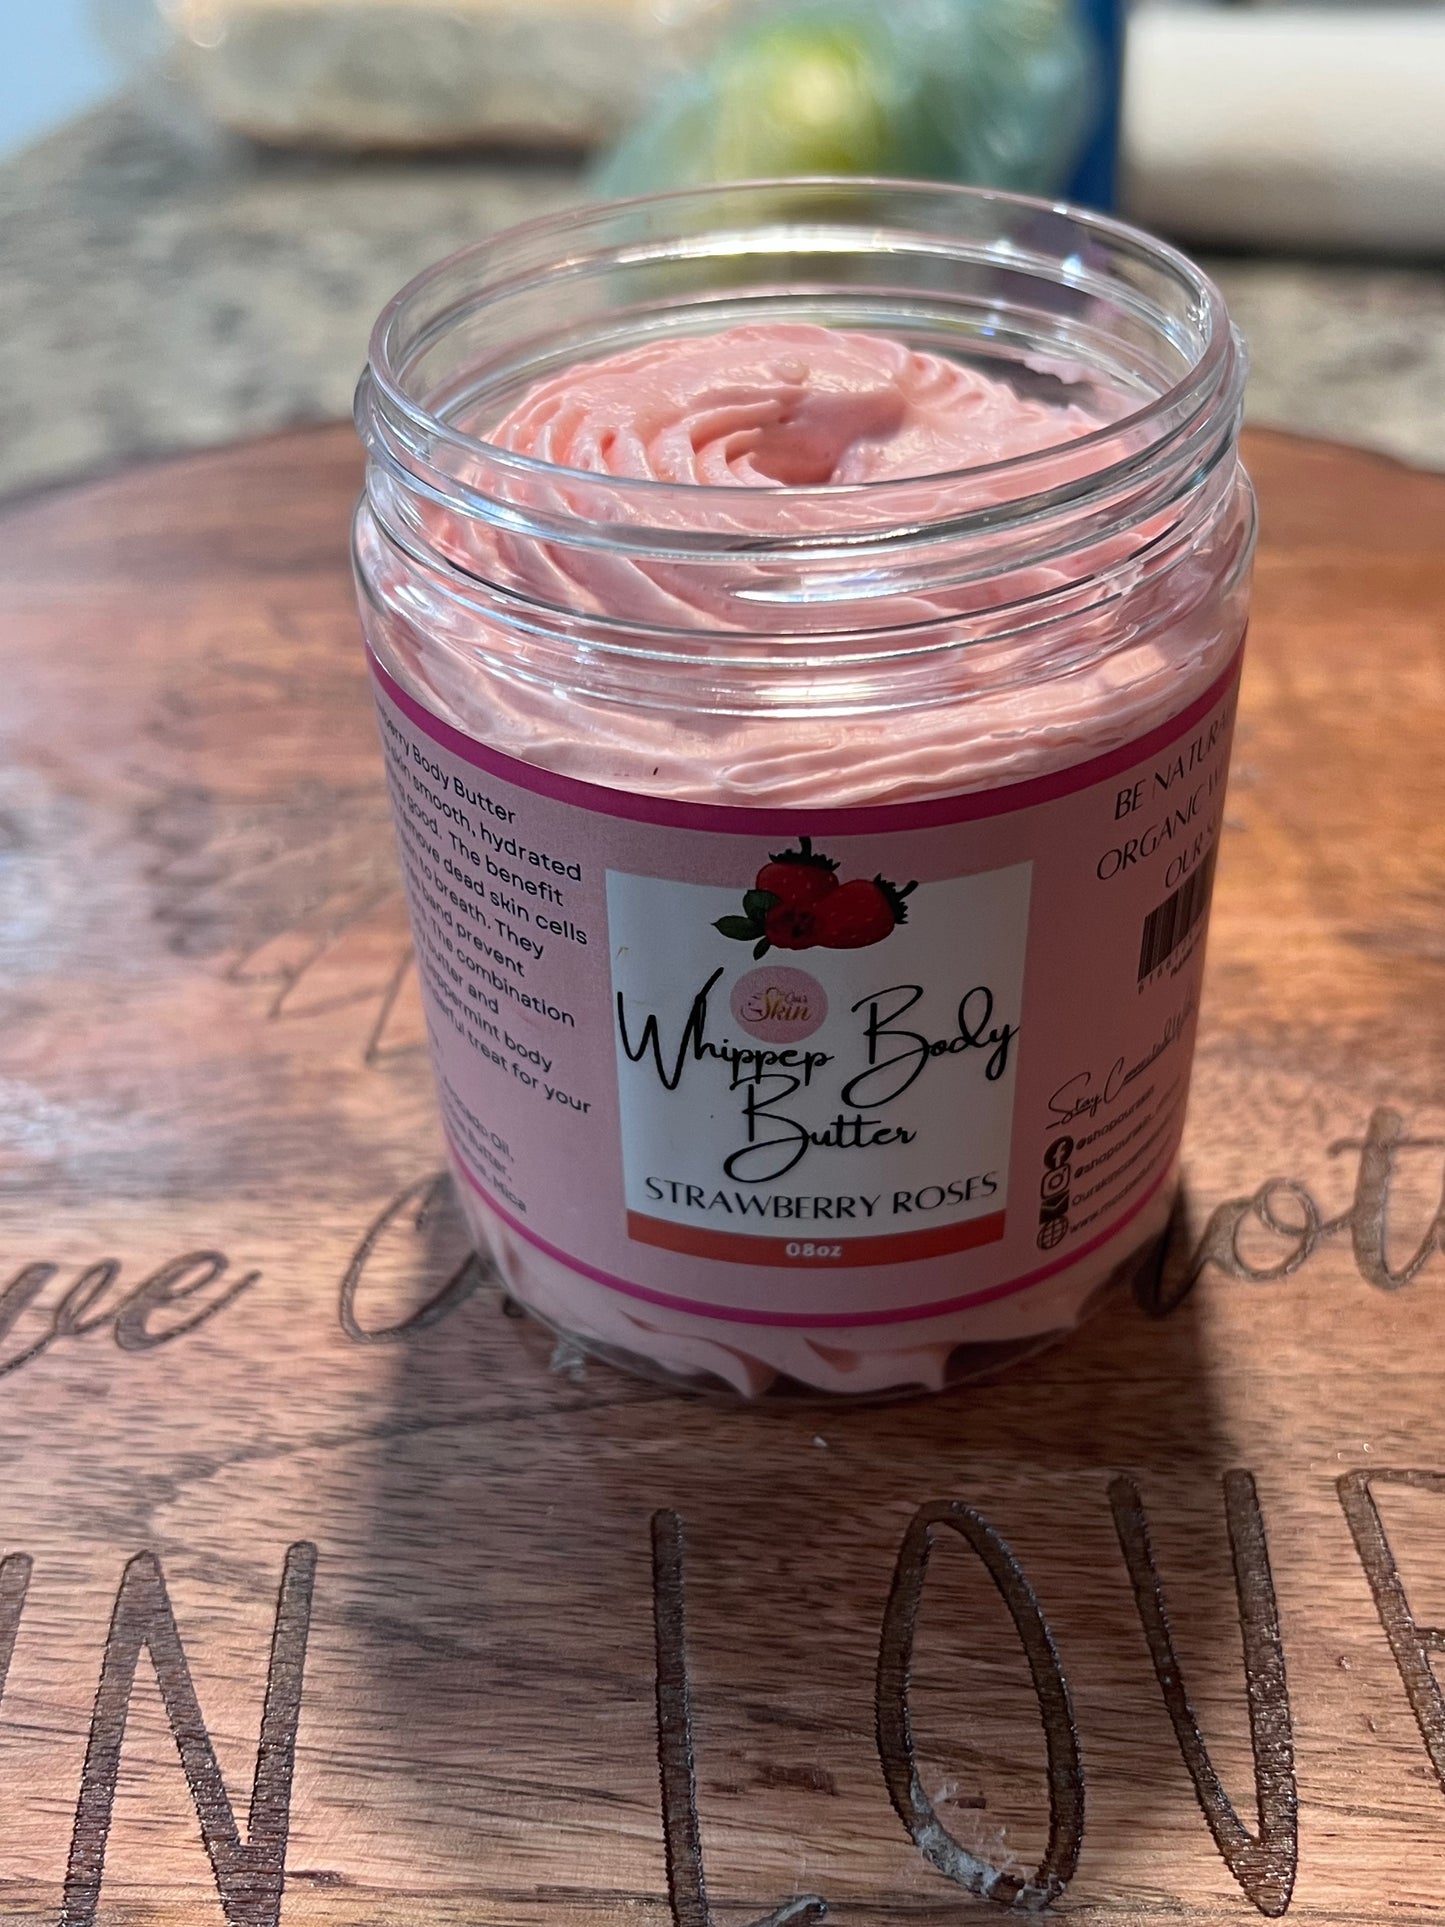 Strawberry Rose Luxury Whipped Body Butter